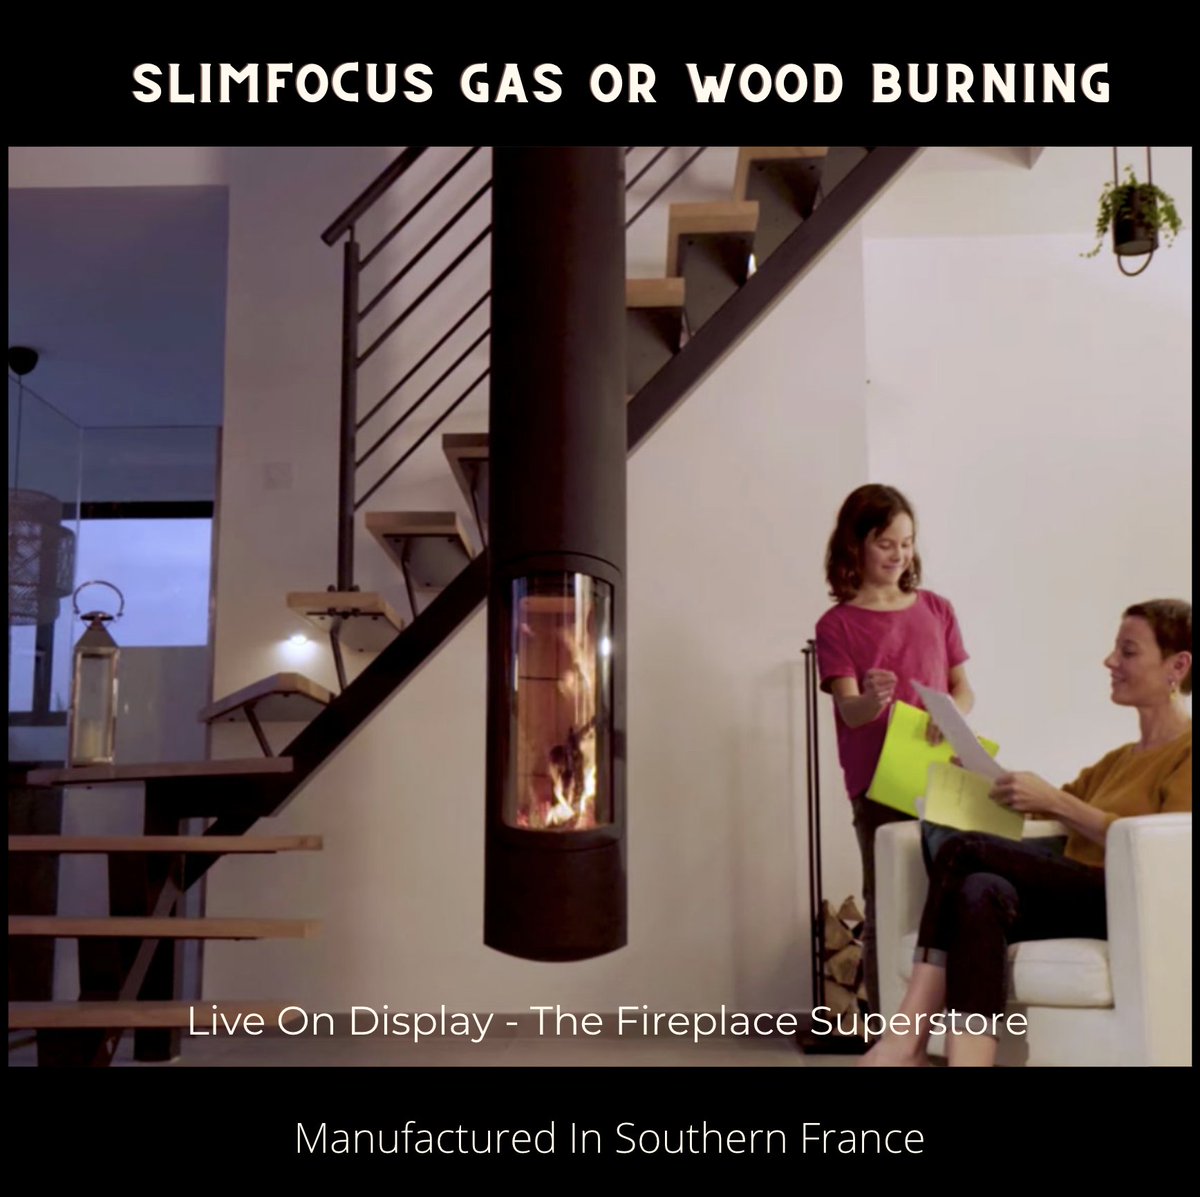 Slimfocus Freehanging Stove Designed And Manufactured In Southern France.

thefireplacesuperstore.co.uk/brands/focus-d…

#freehangingstove #luxurystoves #highendstoves #woodburningstoves #gasstoves